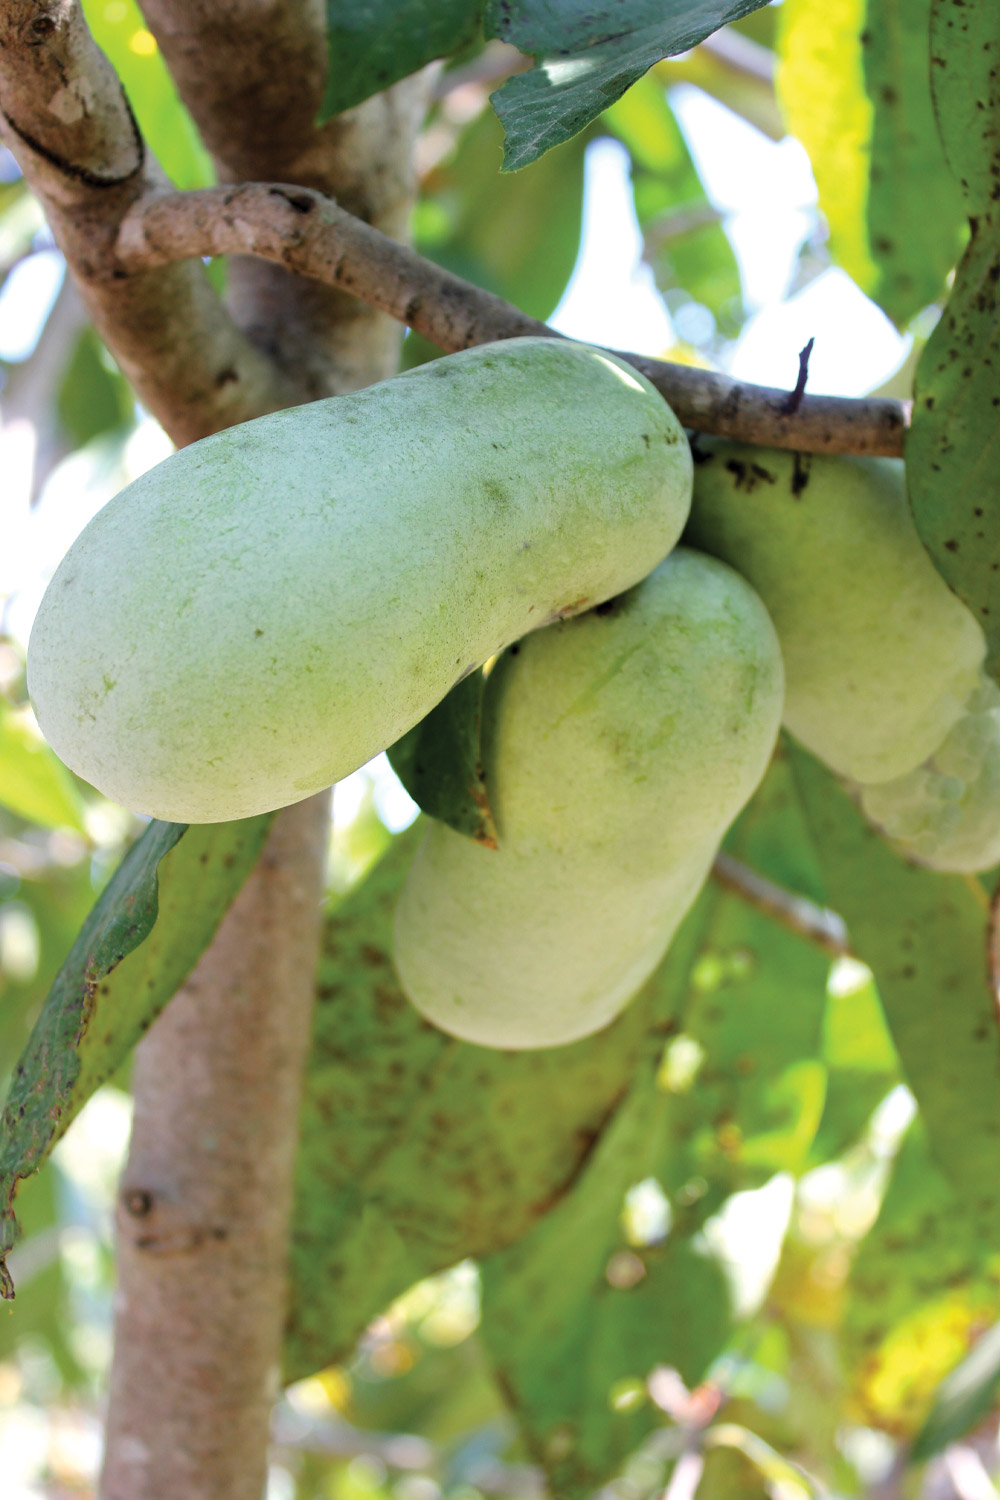 Cluster of pawpaws on the tree